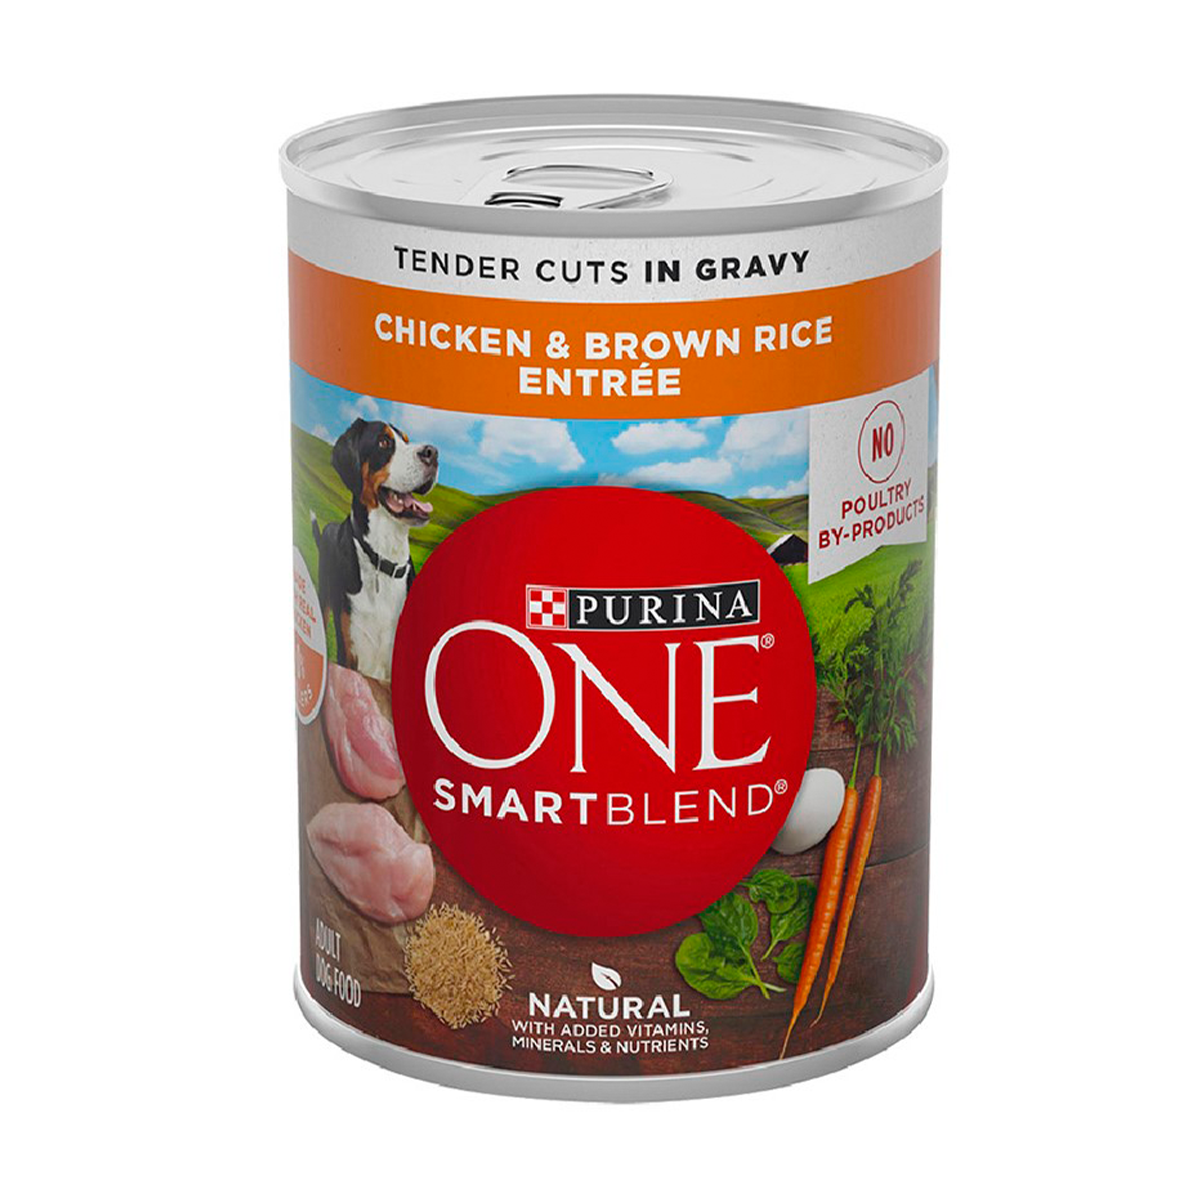 purina-one-wet-chicken-brown-%26-rice-entre%CC%81e-tender-cuts-in-gravy-01.png